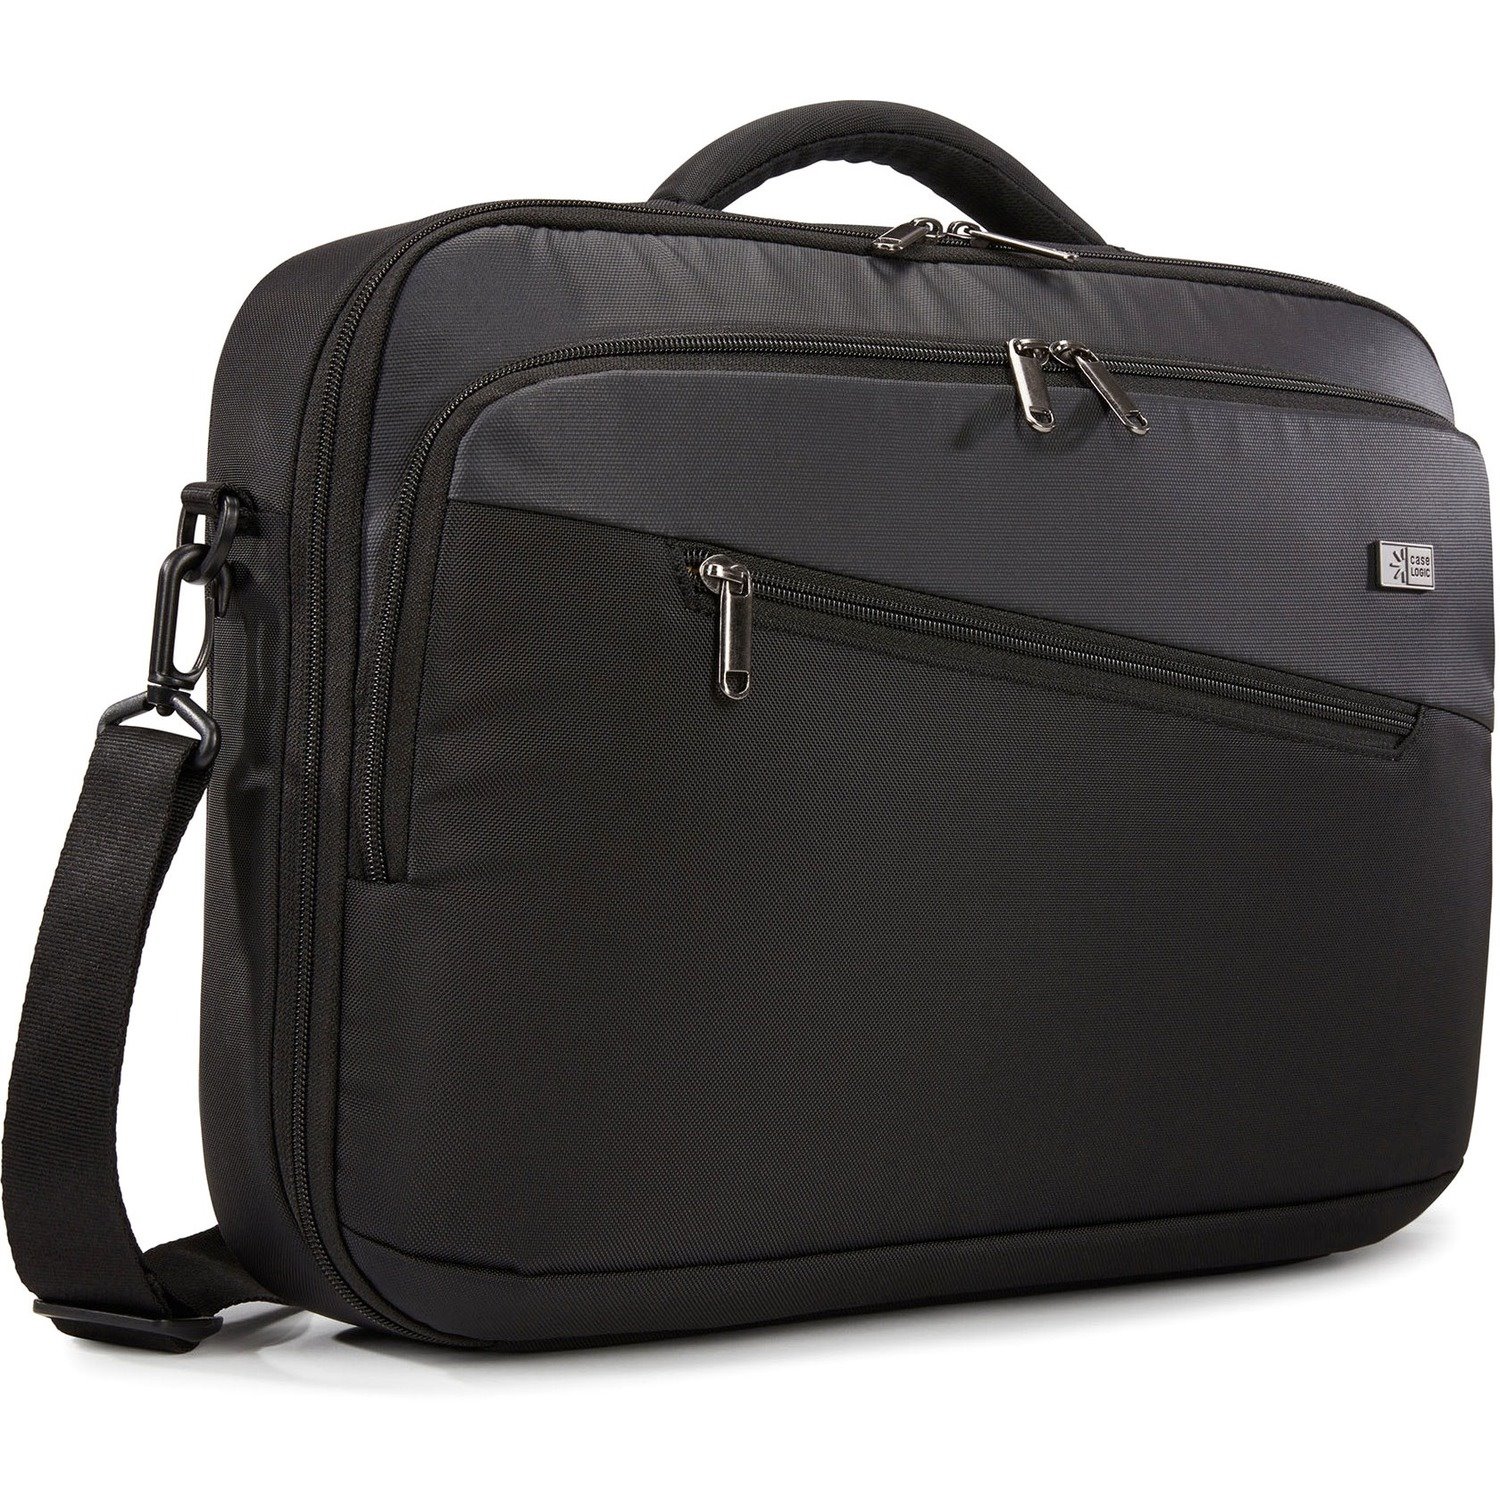 Case Logic Propel PROPC-116 Carrying Case for 12" to 15.6" Notebook, Tablet PC, Accessories - Black